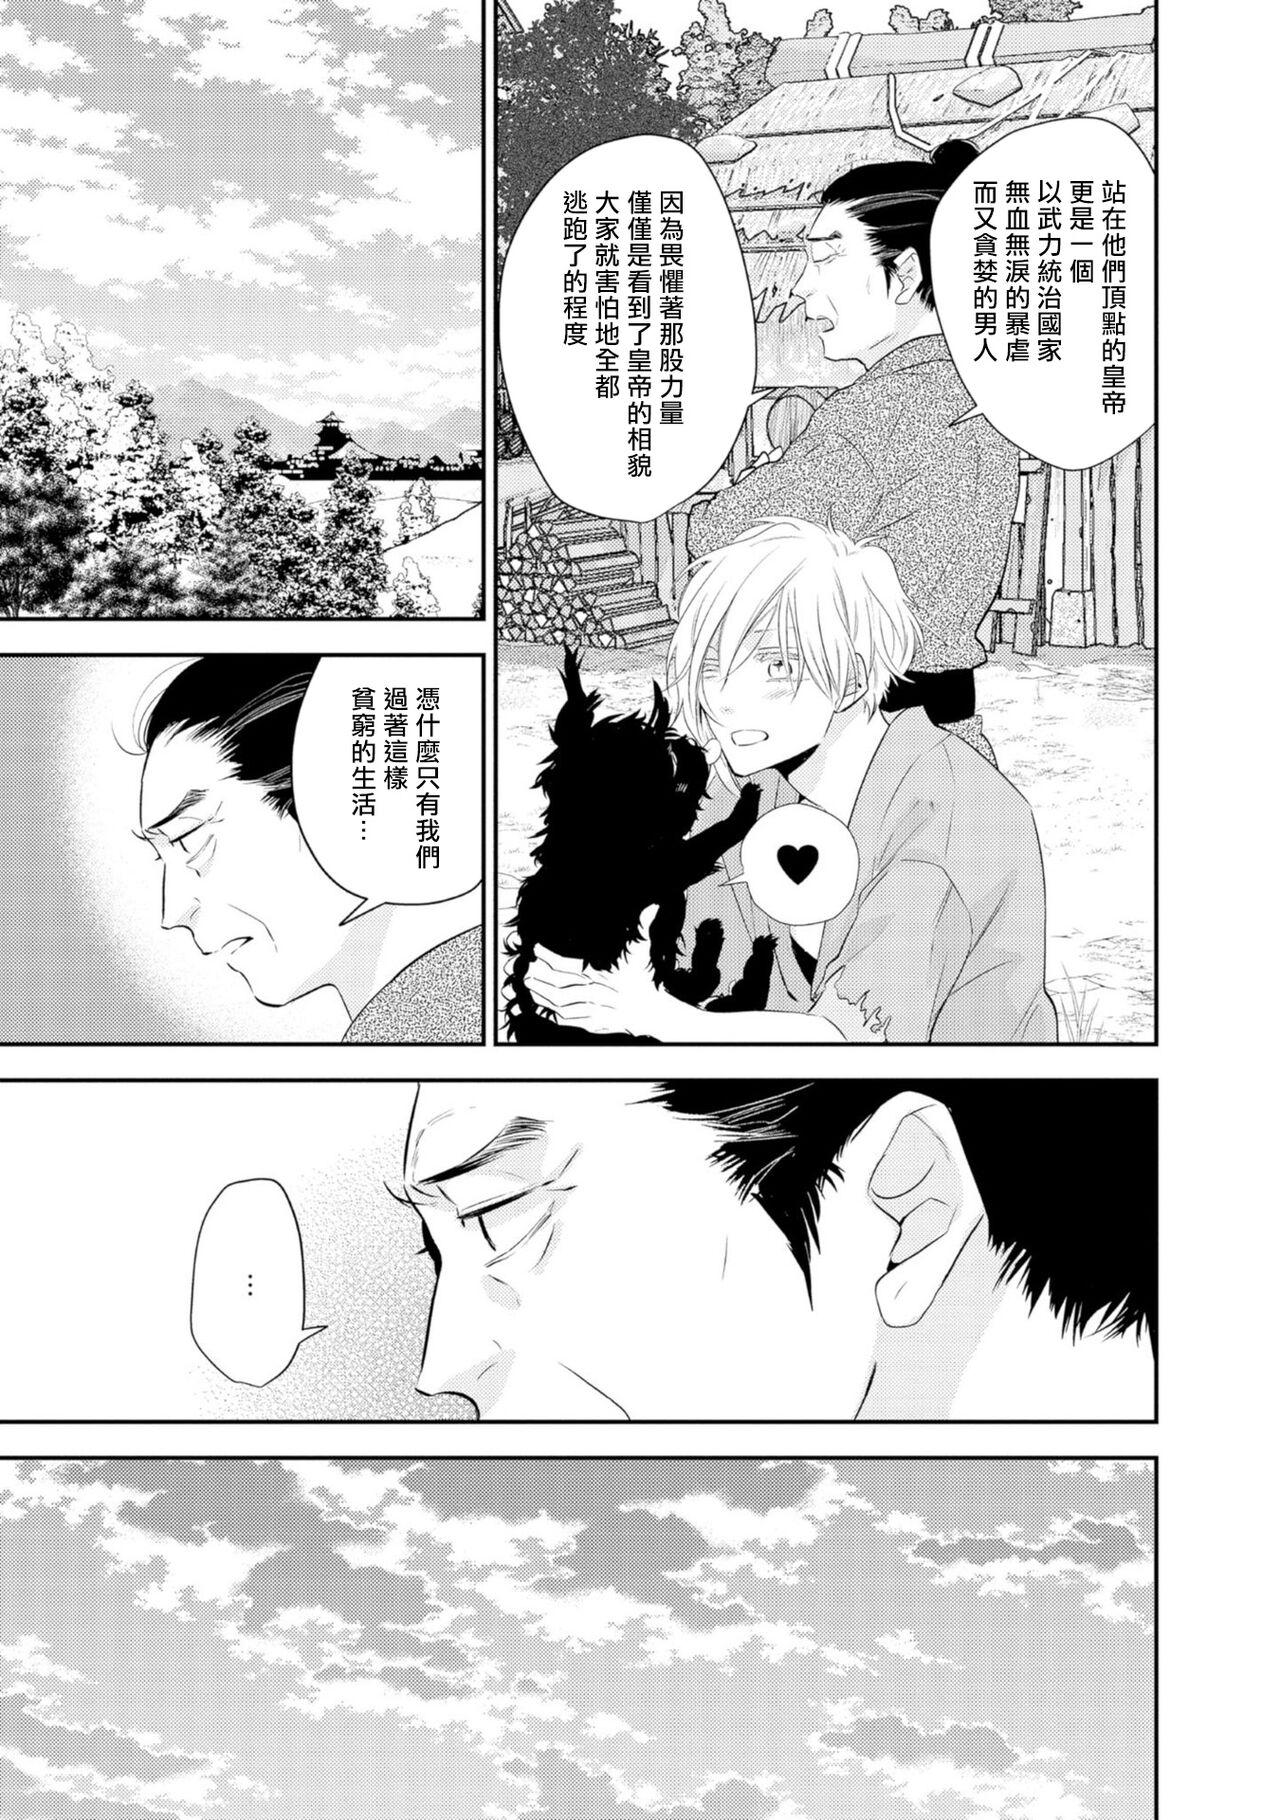 Asses 孤高的王与侍寝者之间的情爱 01 Gay Theresome - Page 10